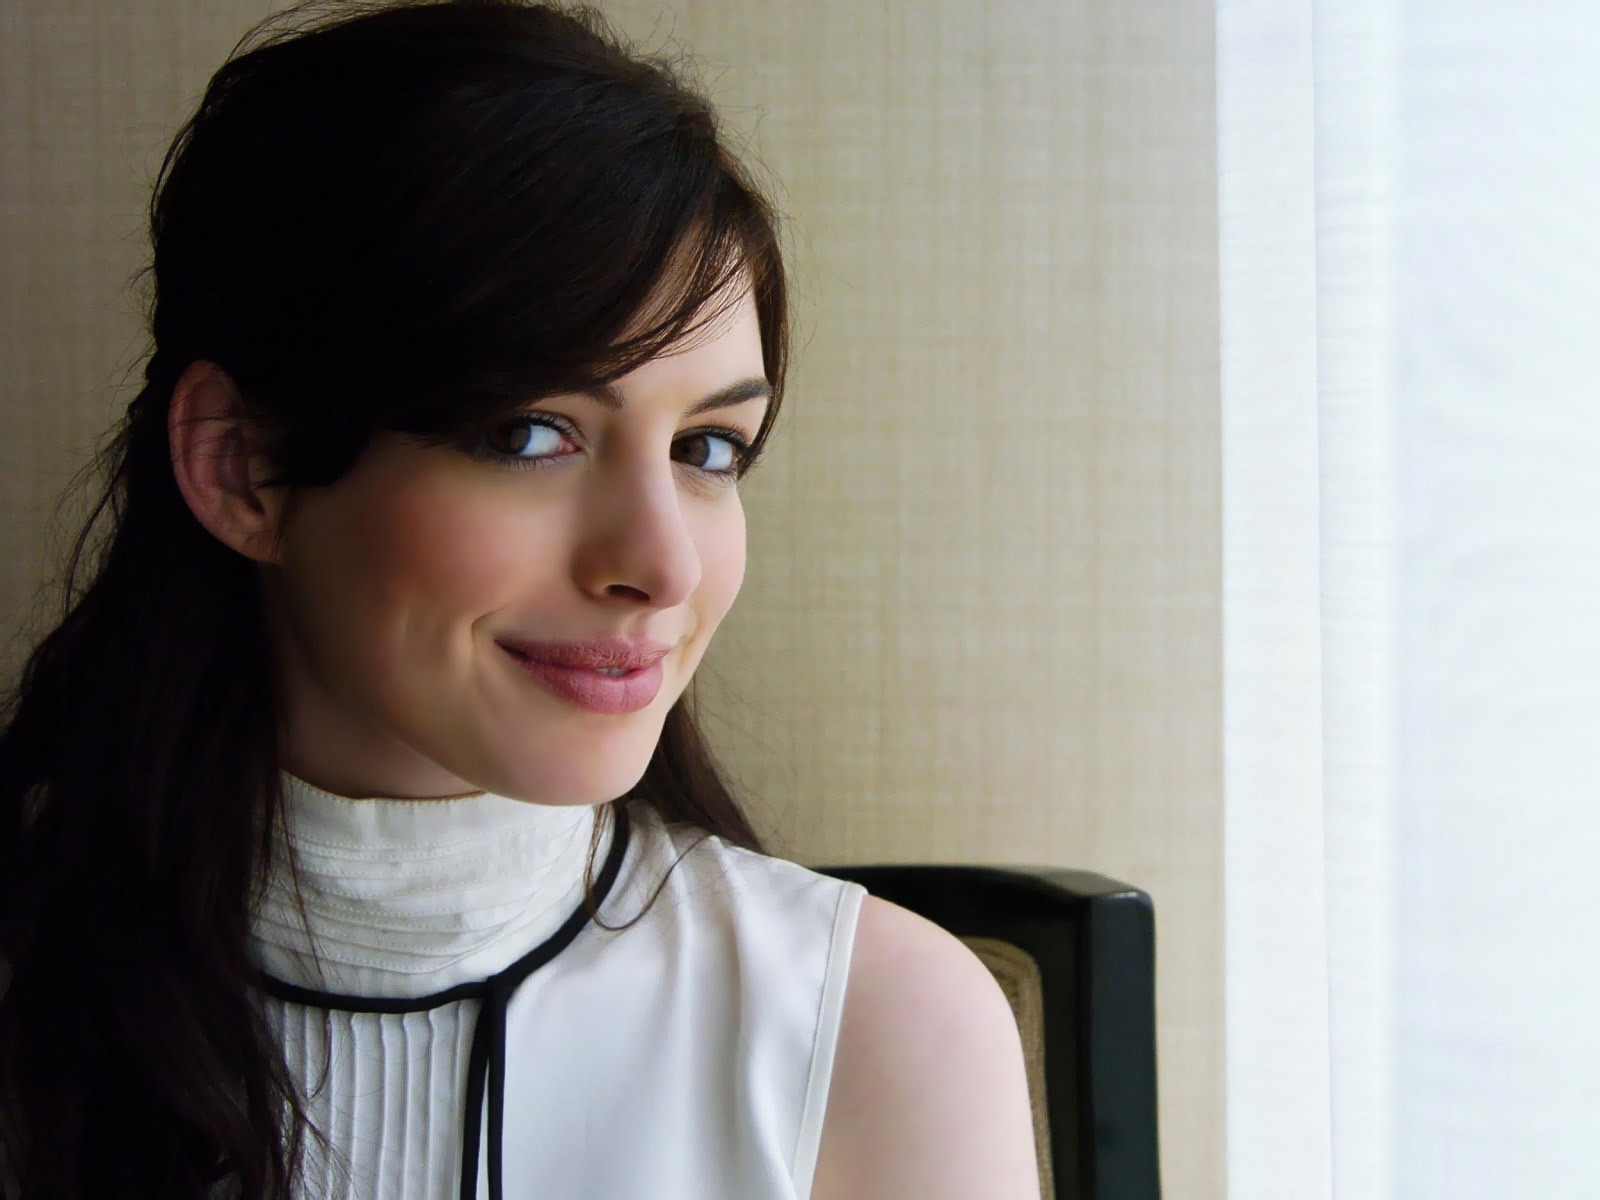 Anne Hathaway Cute for 1600 x 1200 resolution